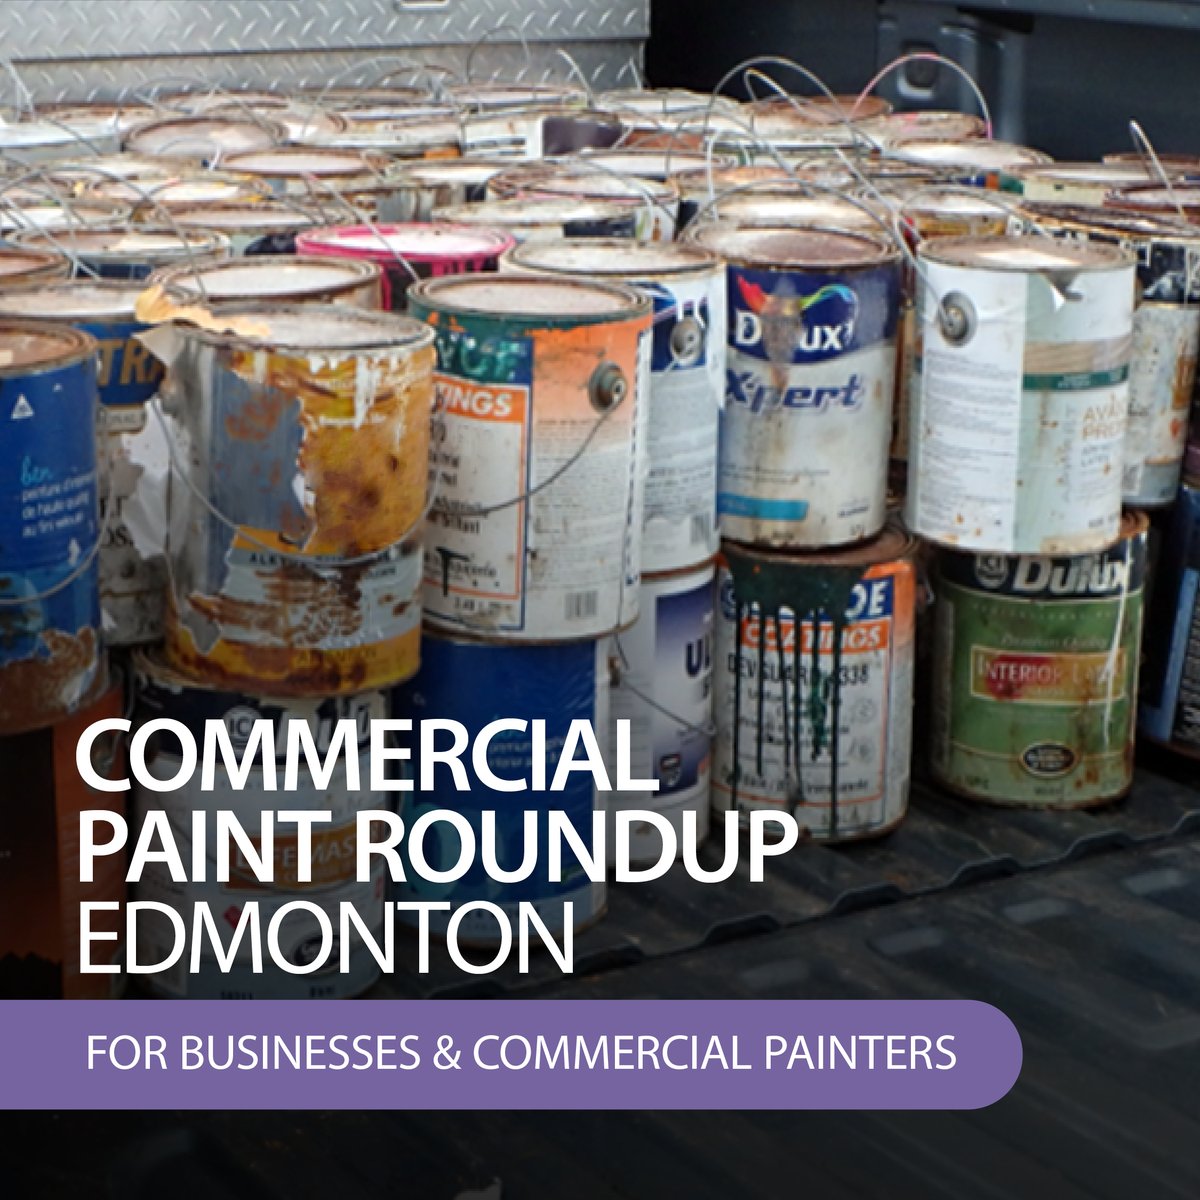 Attention #YEG #CommercialPainters and #Businesses! Bring your leftover #paint, empty paint cans, and spray paint to 1810 66 AVE NW, until 2 pm today and we will #recycle them for free! bit.ly/49ZP8d0 #Edmonton #Painter